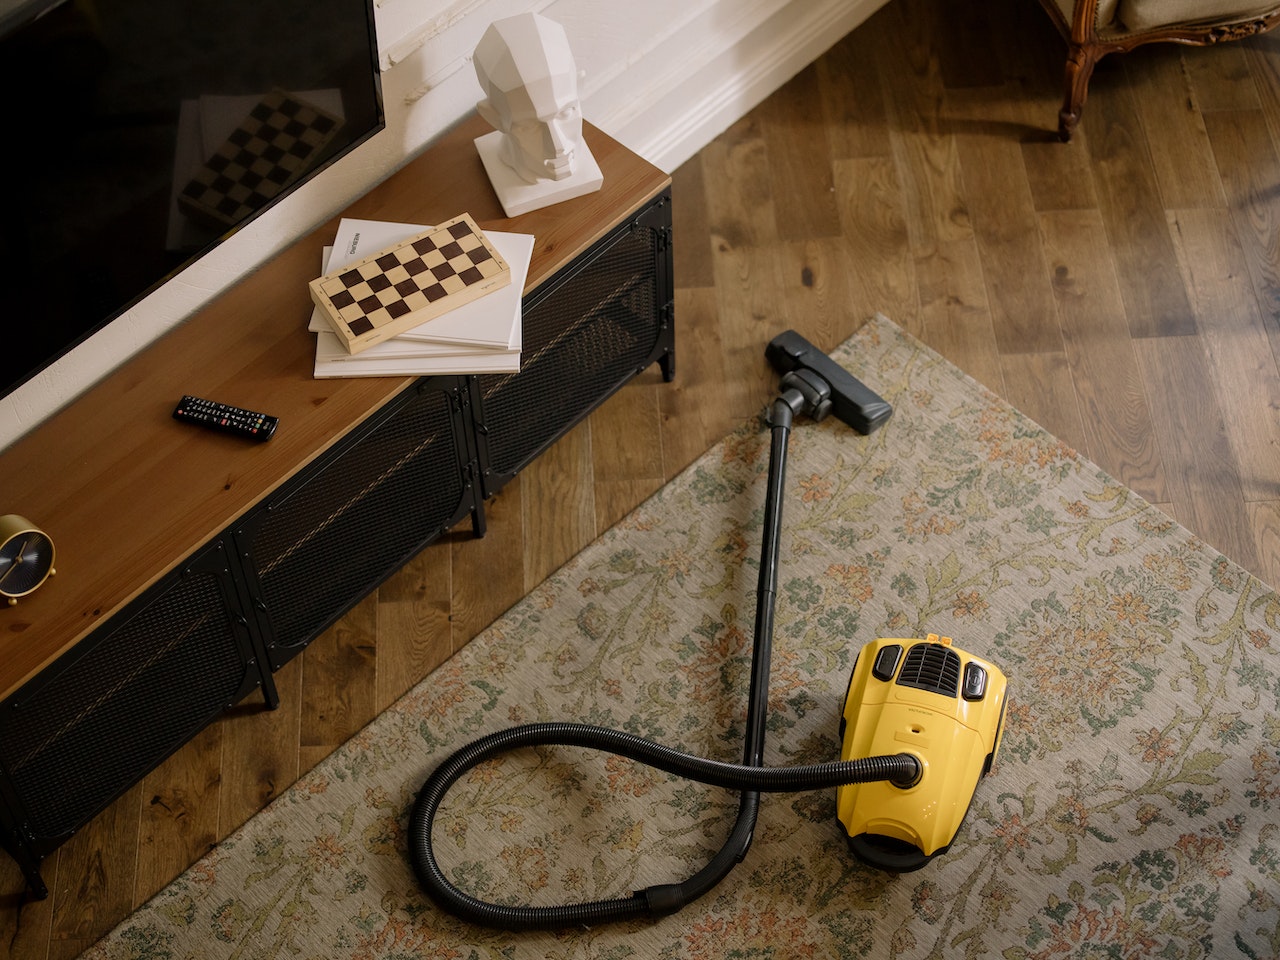 How to do a routine carpet cleaning